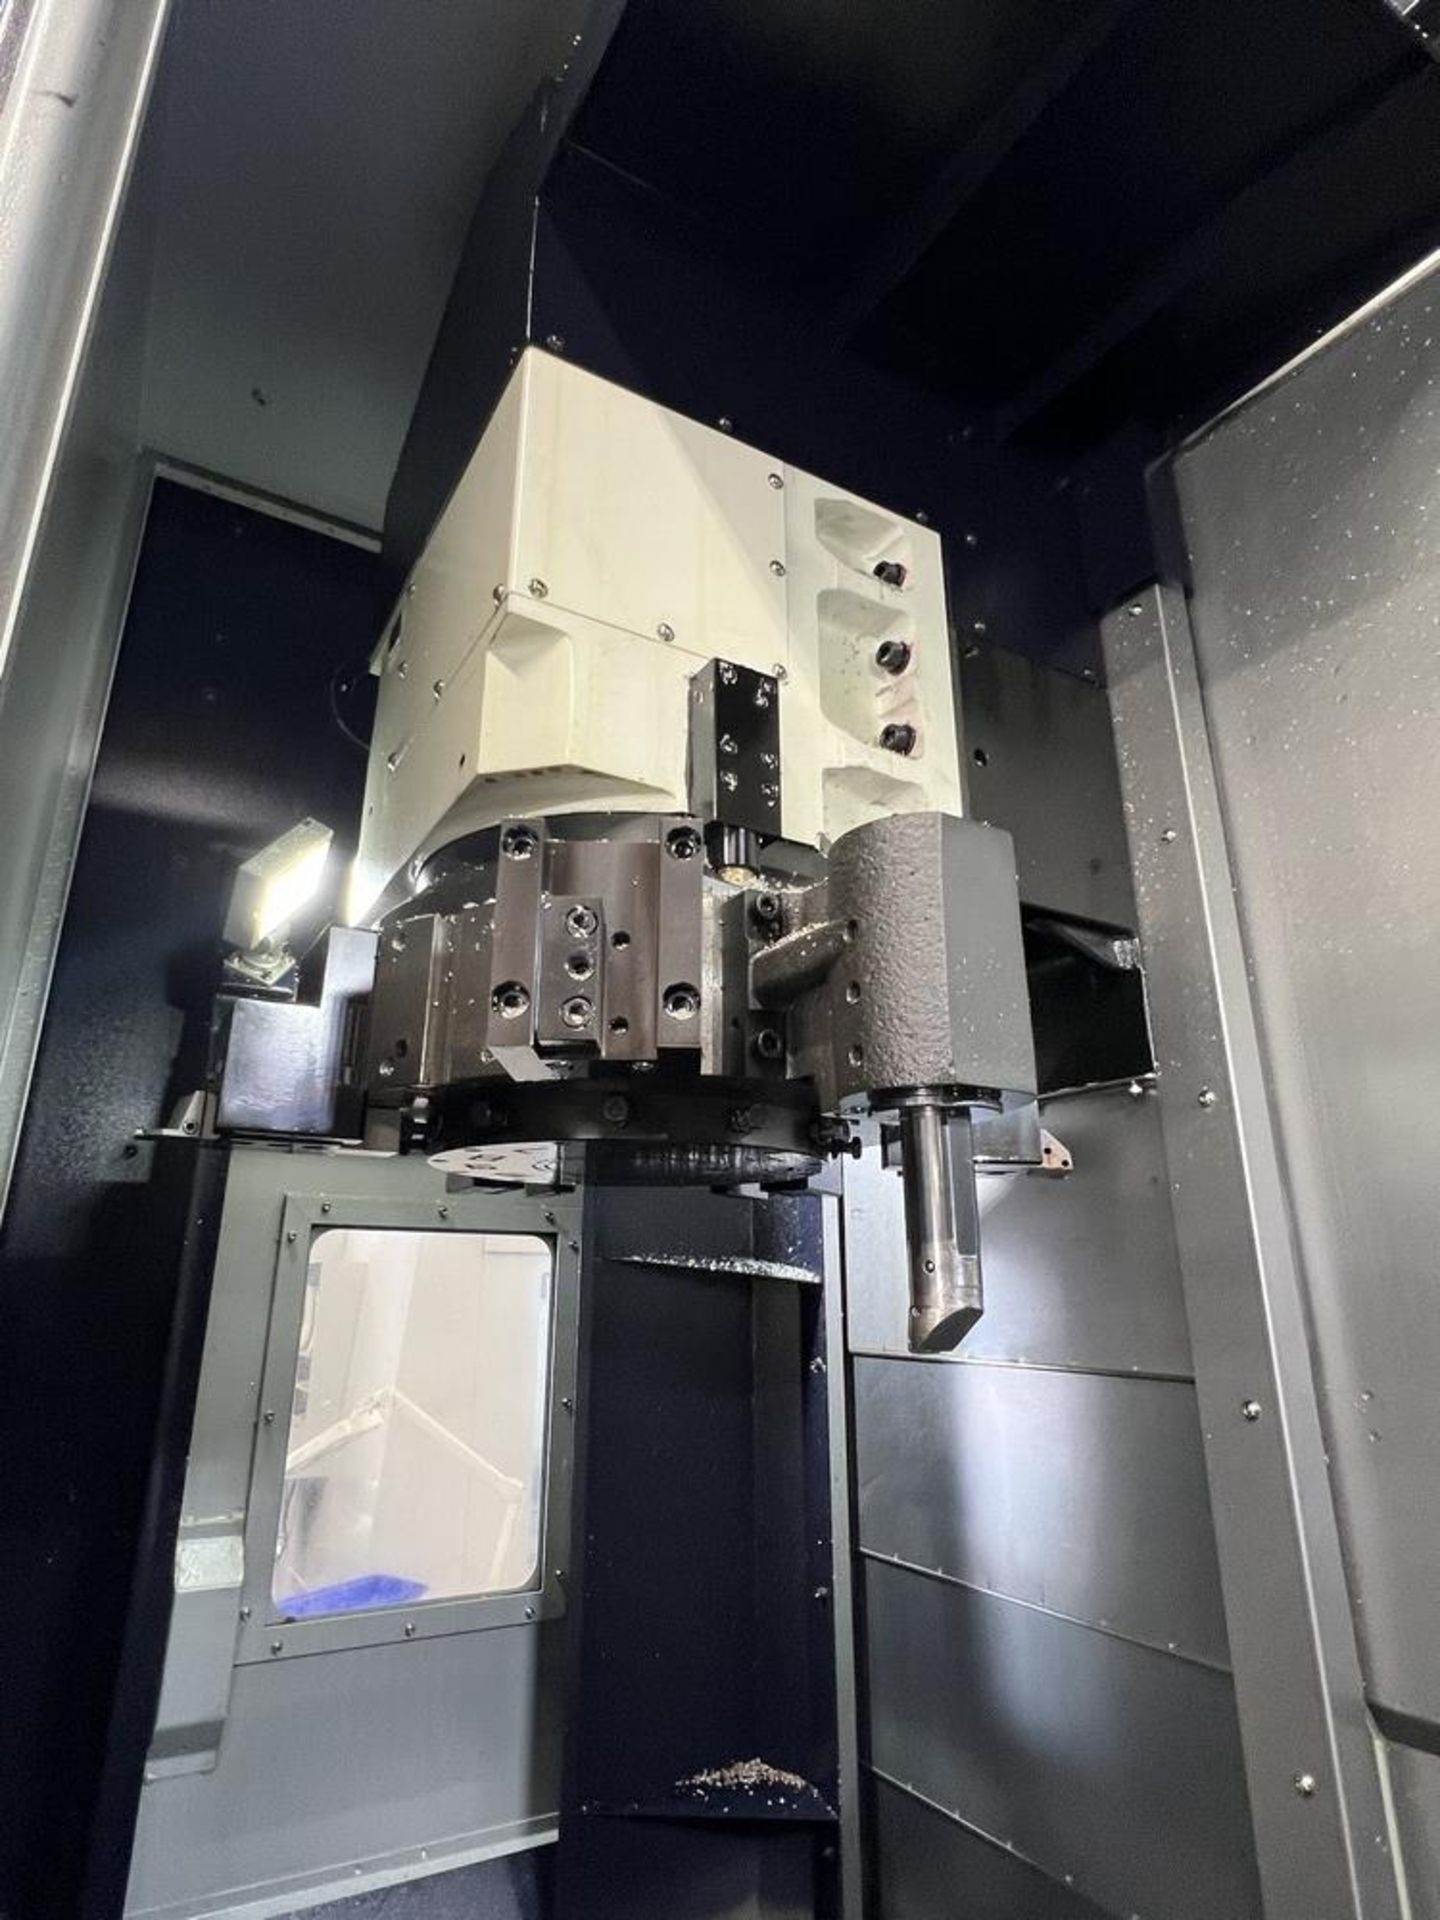 2022 Hwacheon VT-650L, 1500 RPM, 24" Chuck, 12 Station Turret, 35" Max Swing, Max. Turn Height 29. - Image 23 of 28